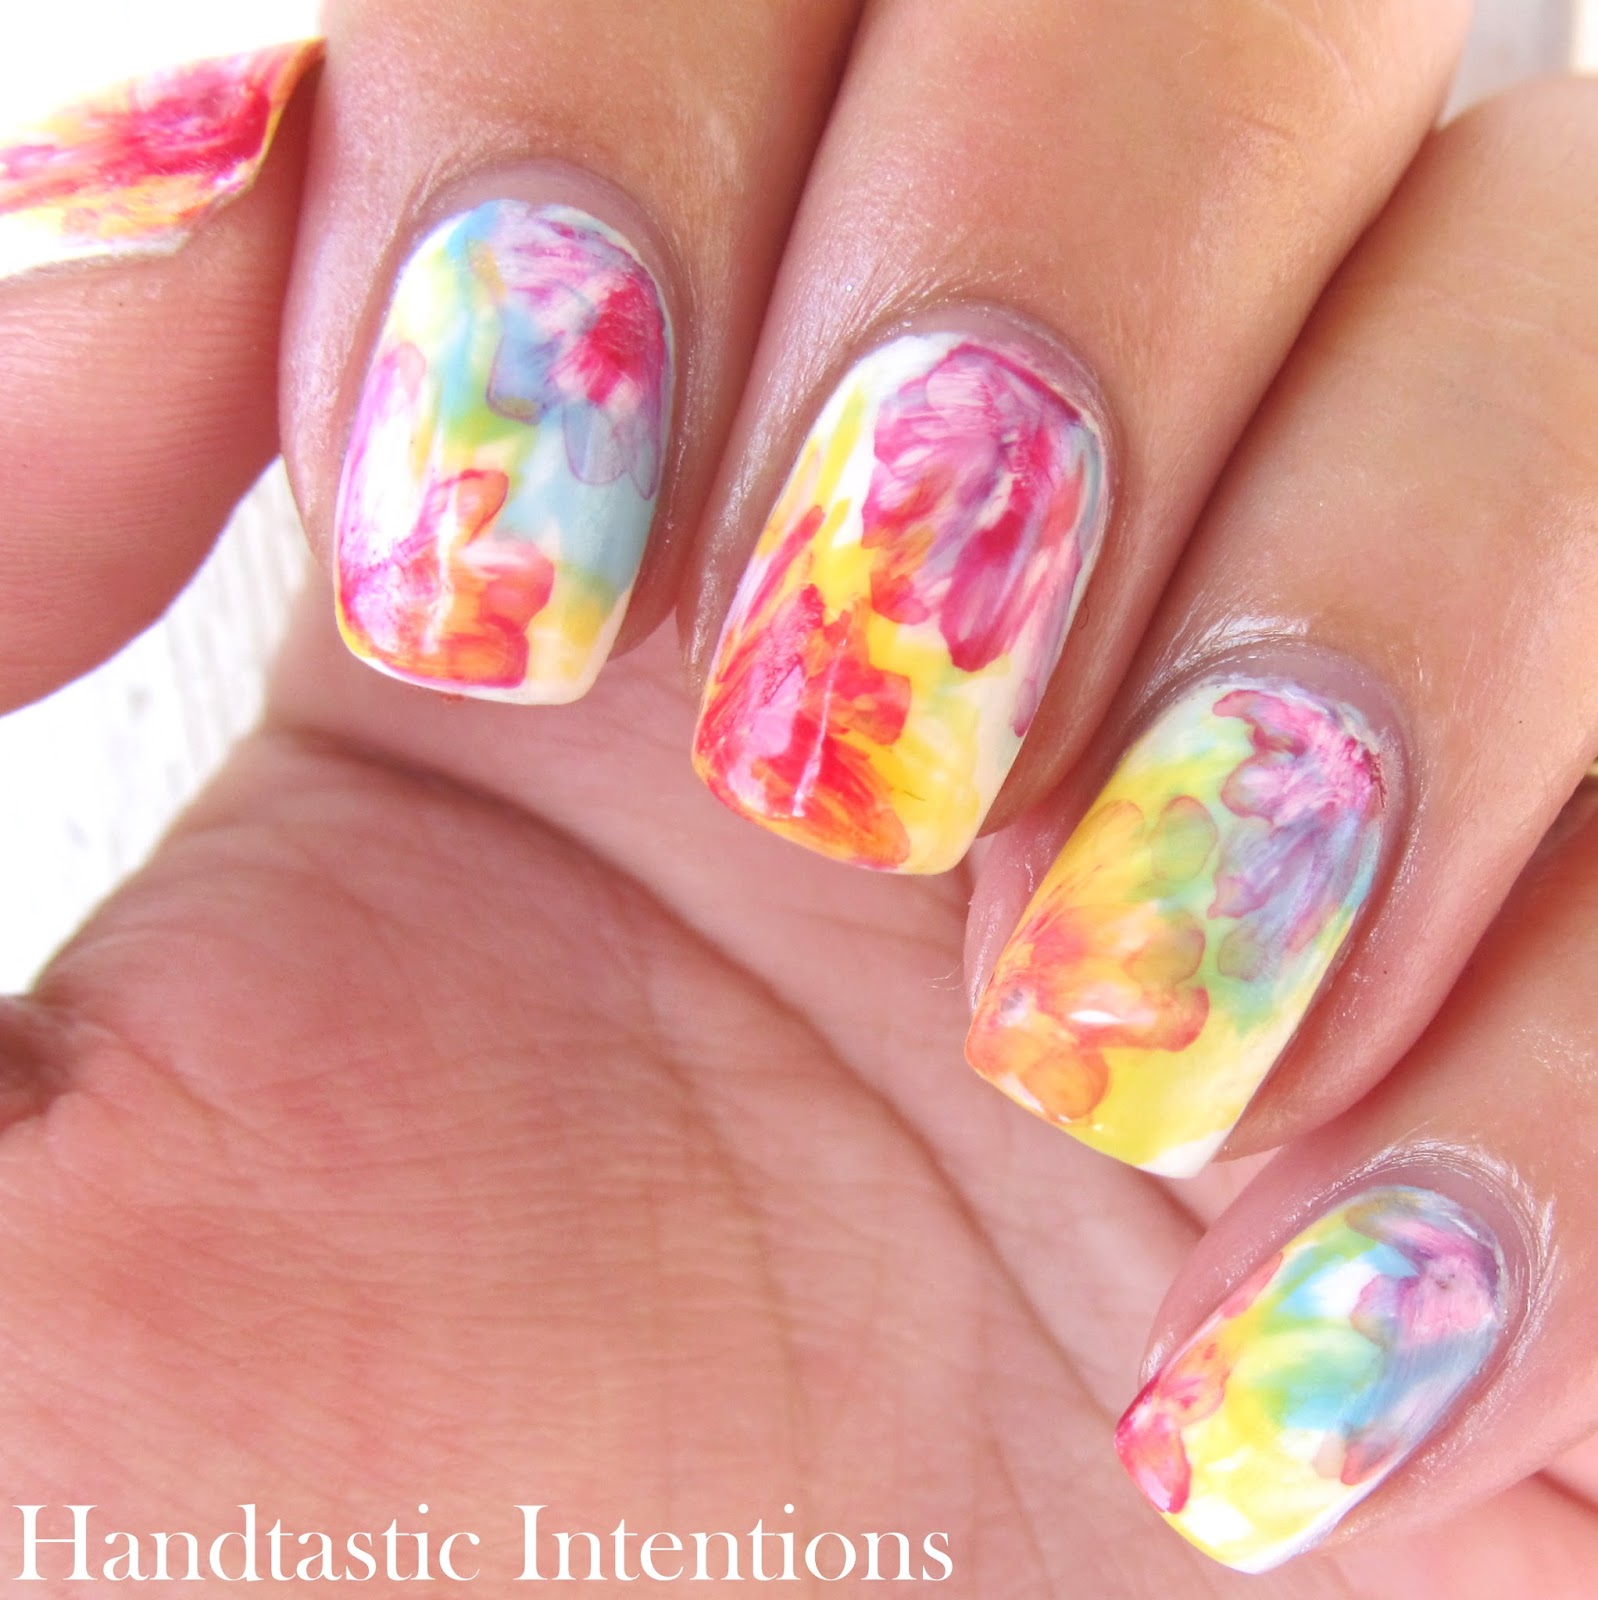 Handtastic Intentions: Nail Art: Watercolor Flowers Tri Polish Tuesday